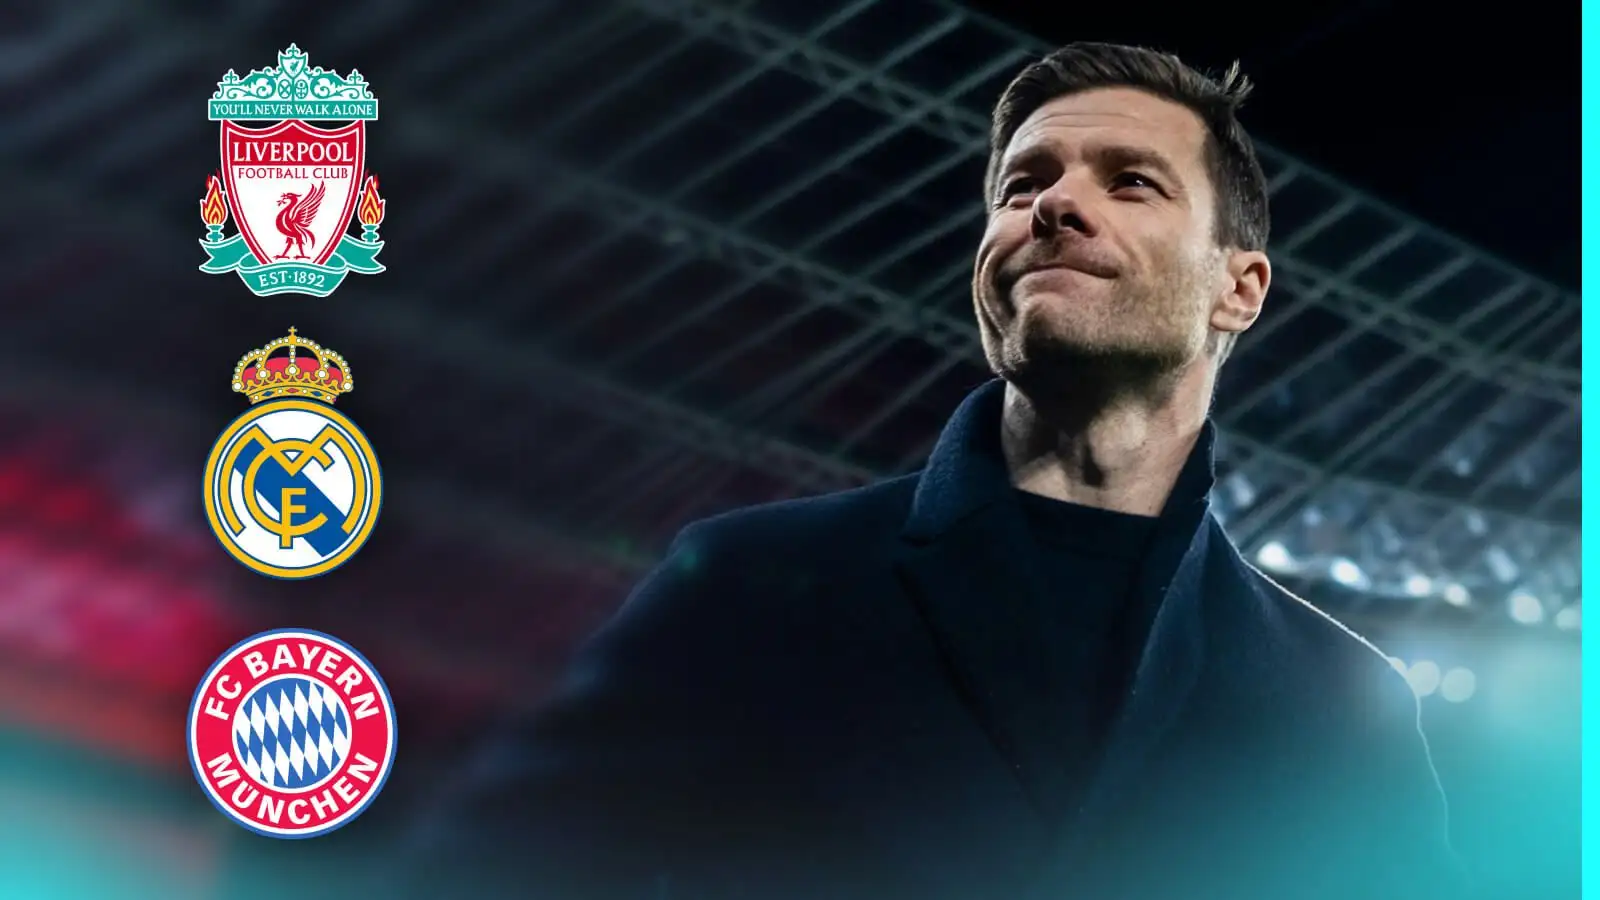 Liverpool, Real Madrid and Bayern target Xabi Alonso appearances on previously a suit.